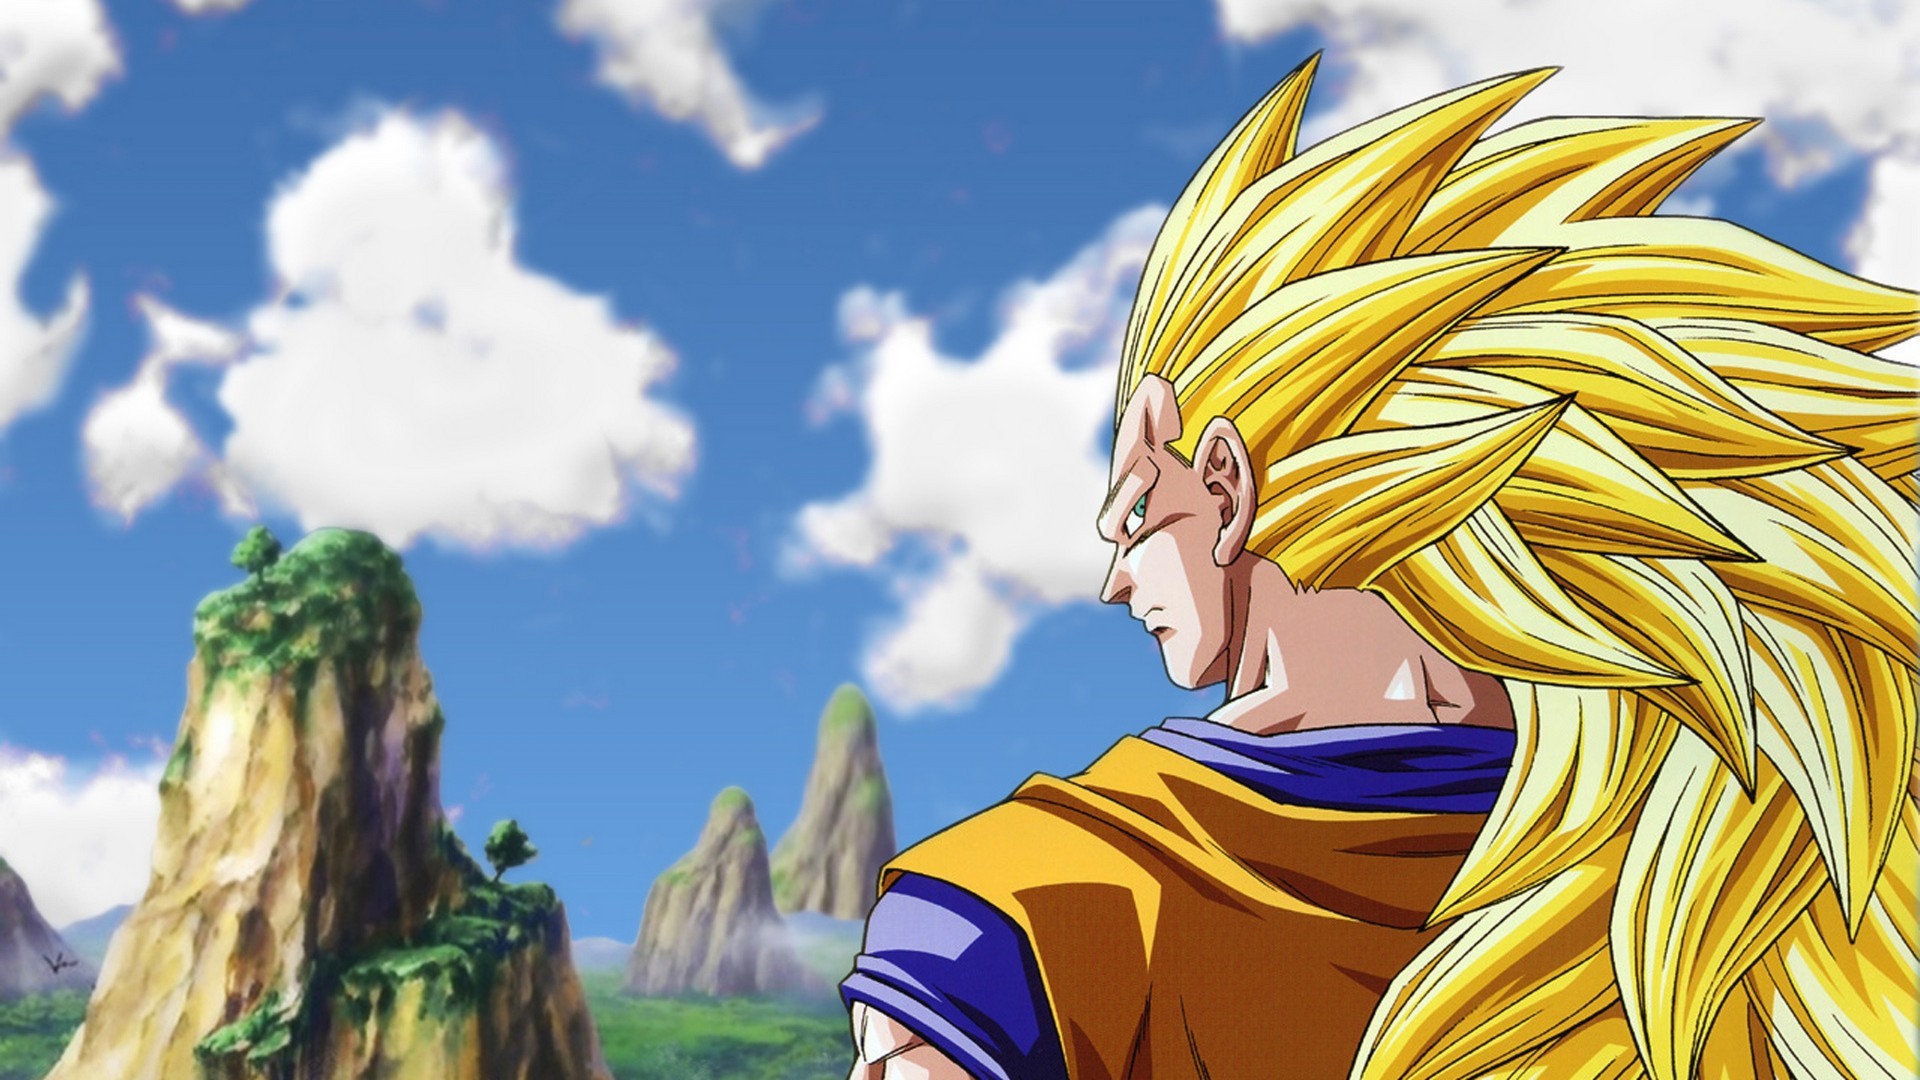 Best Goku SSJ3 Wallpaper with resolution 1920X1080 pixel. You can use this wallpaper as background for your desktop Computer Screensavers, Android or iPhone smartphones